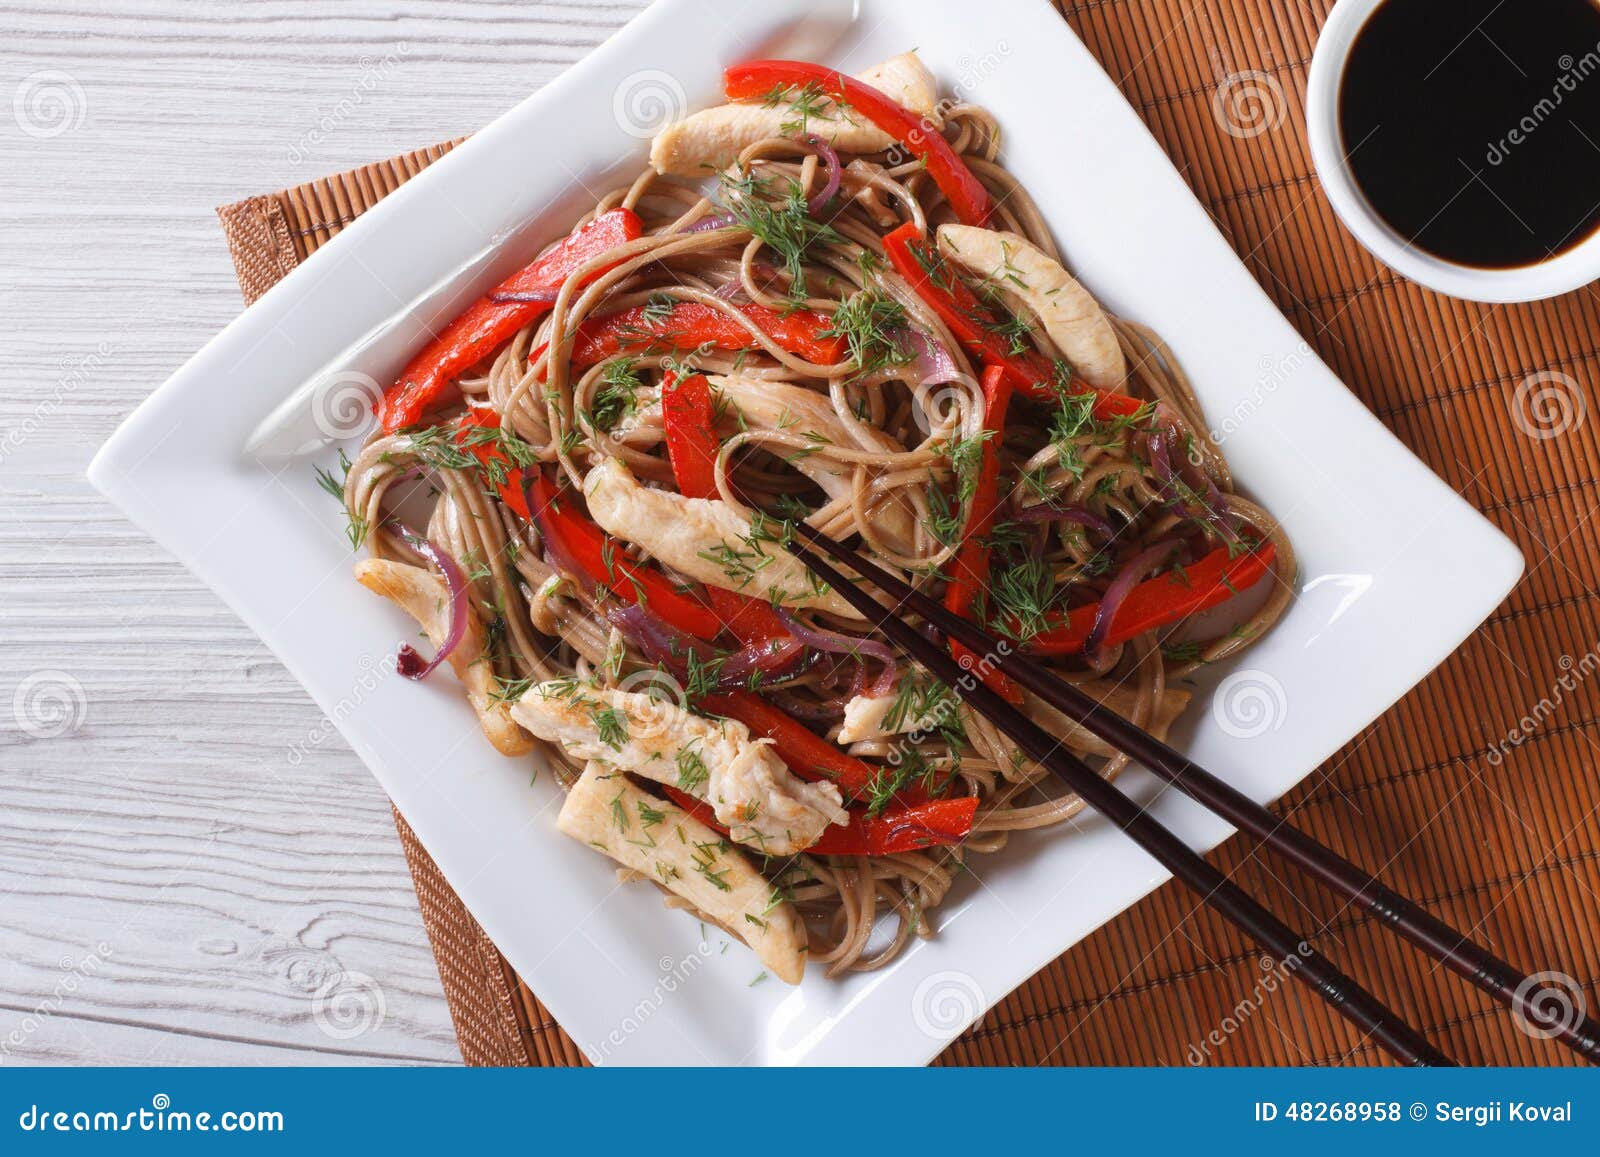 Soba Noodles With Chicken And Vegetables Top View ...